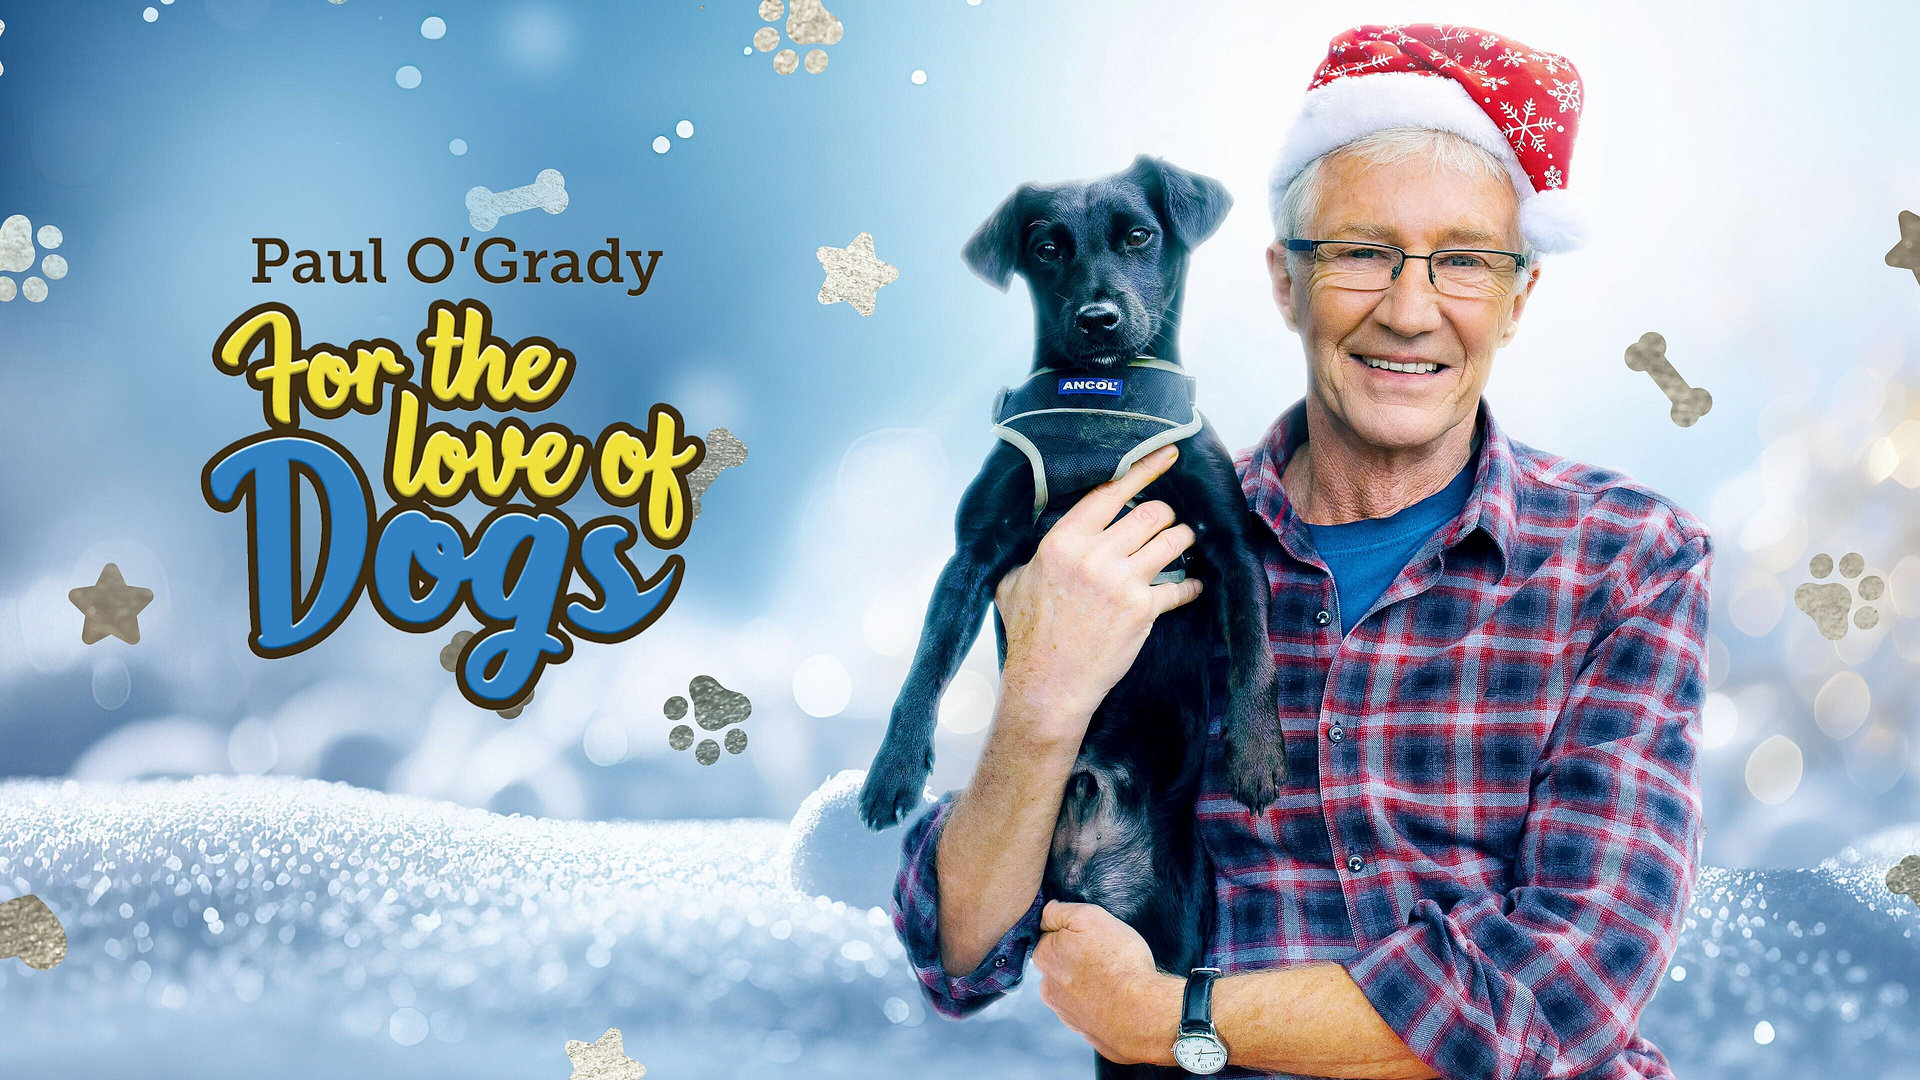 Paul O'Grady For The Love of Dogs At Christmas